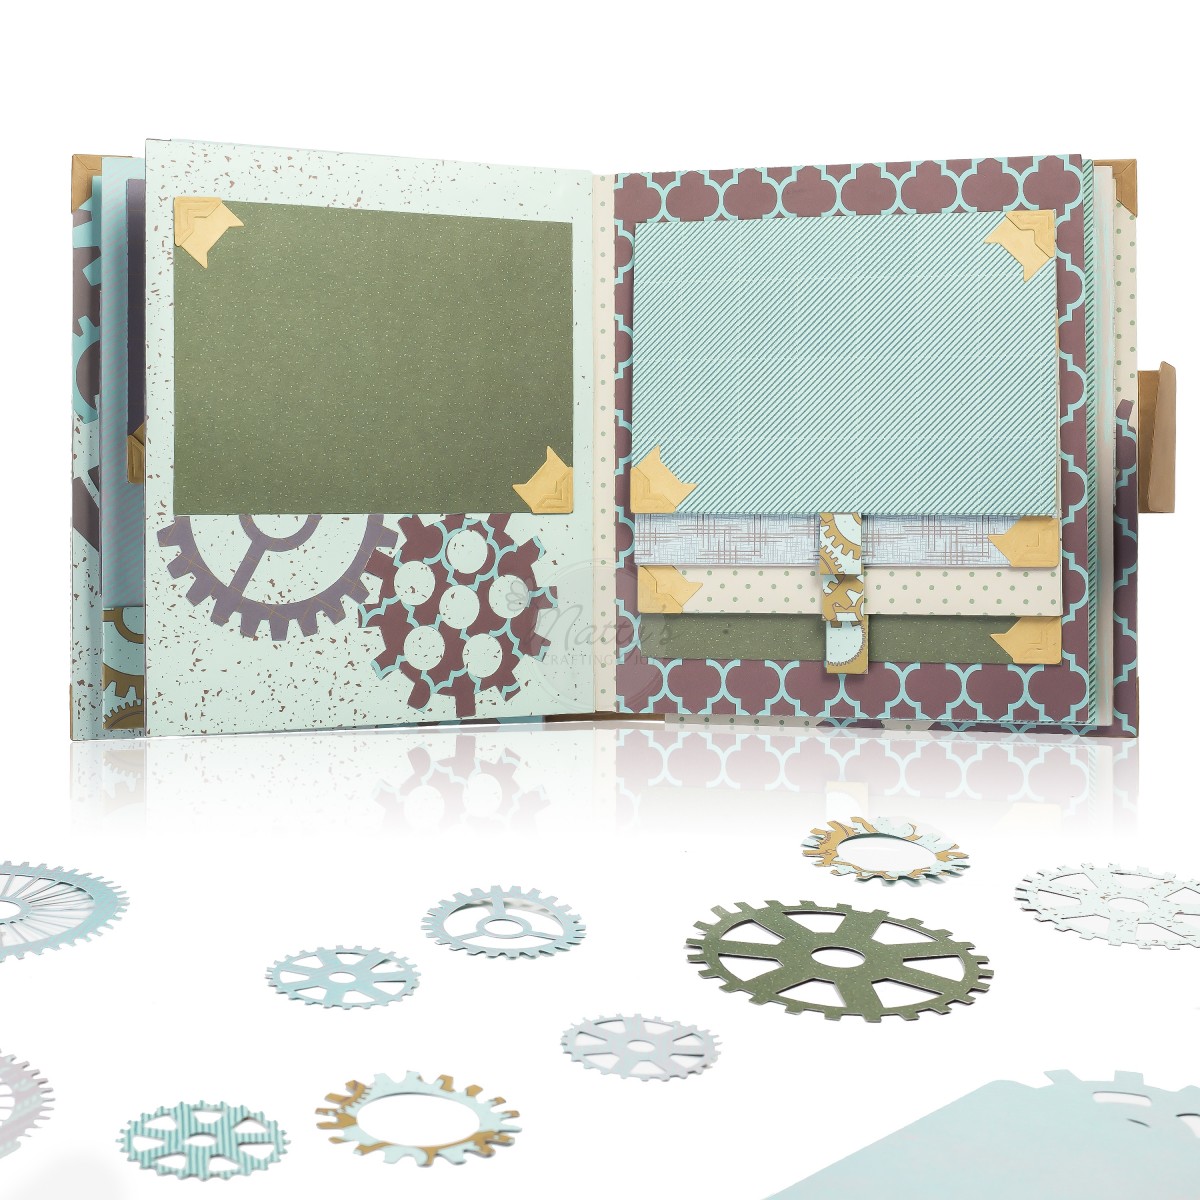 Matty's Crafting Joy Masculine Chic - 12x12 Double Sided Turquoise Scrapbook Paper Pad, 24 Light Teal Blue Patterned